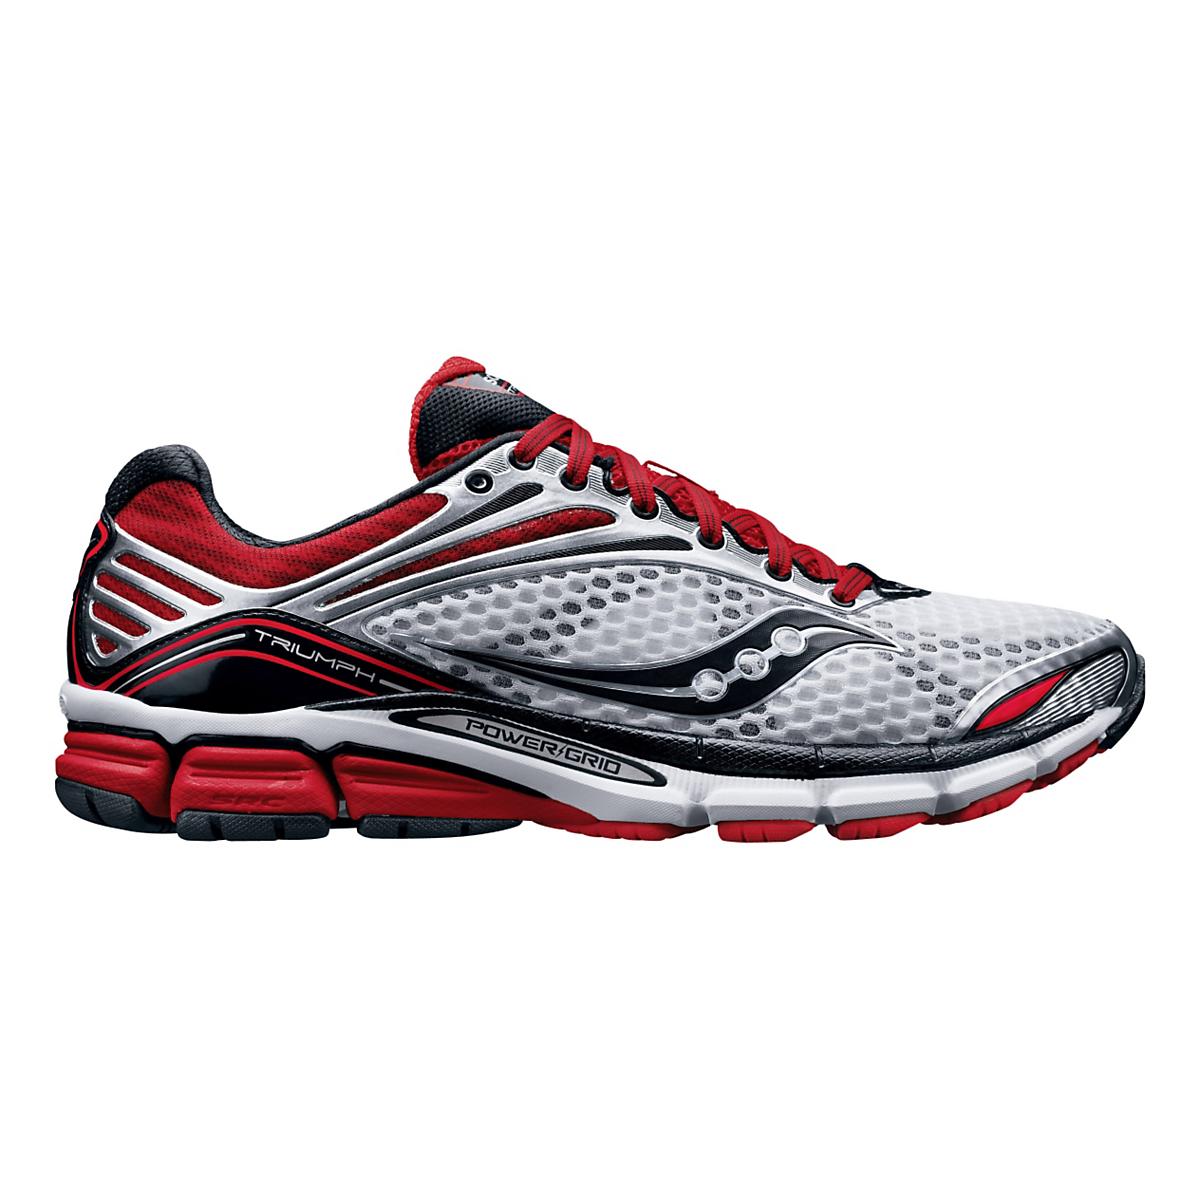 Mens Saucony Triumph 11 Running Shoe at Road Runner Sports